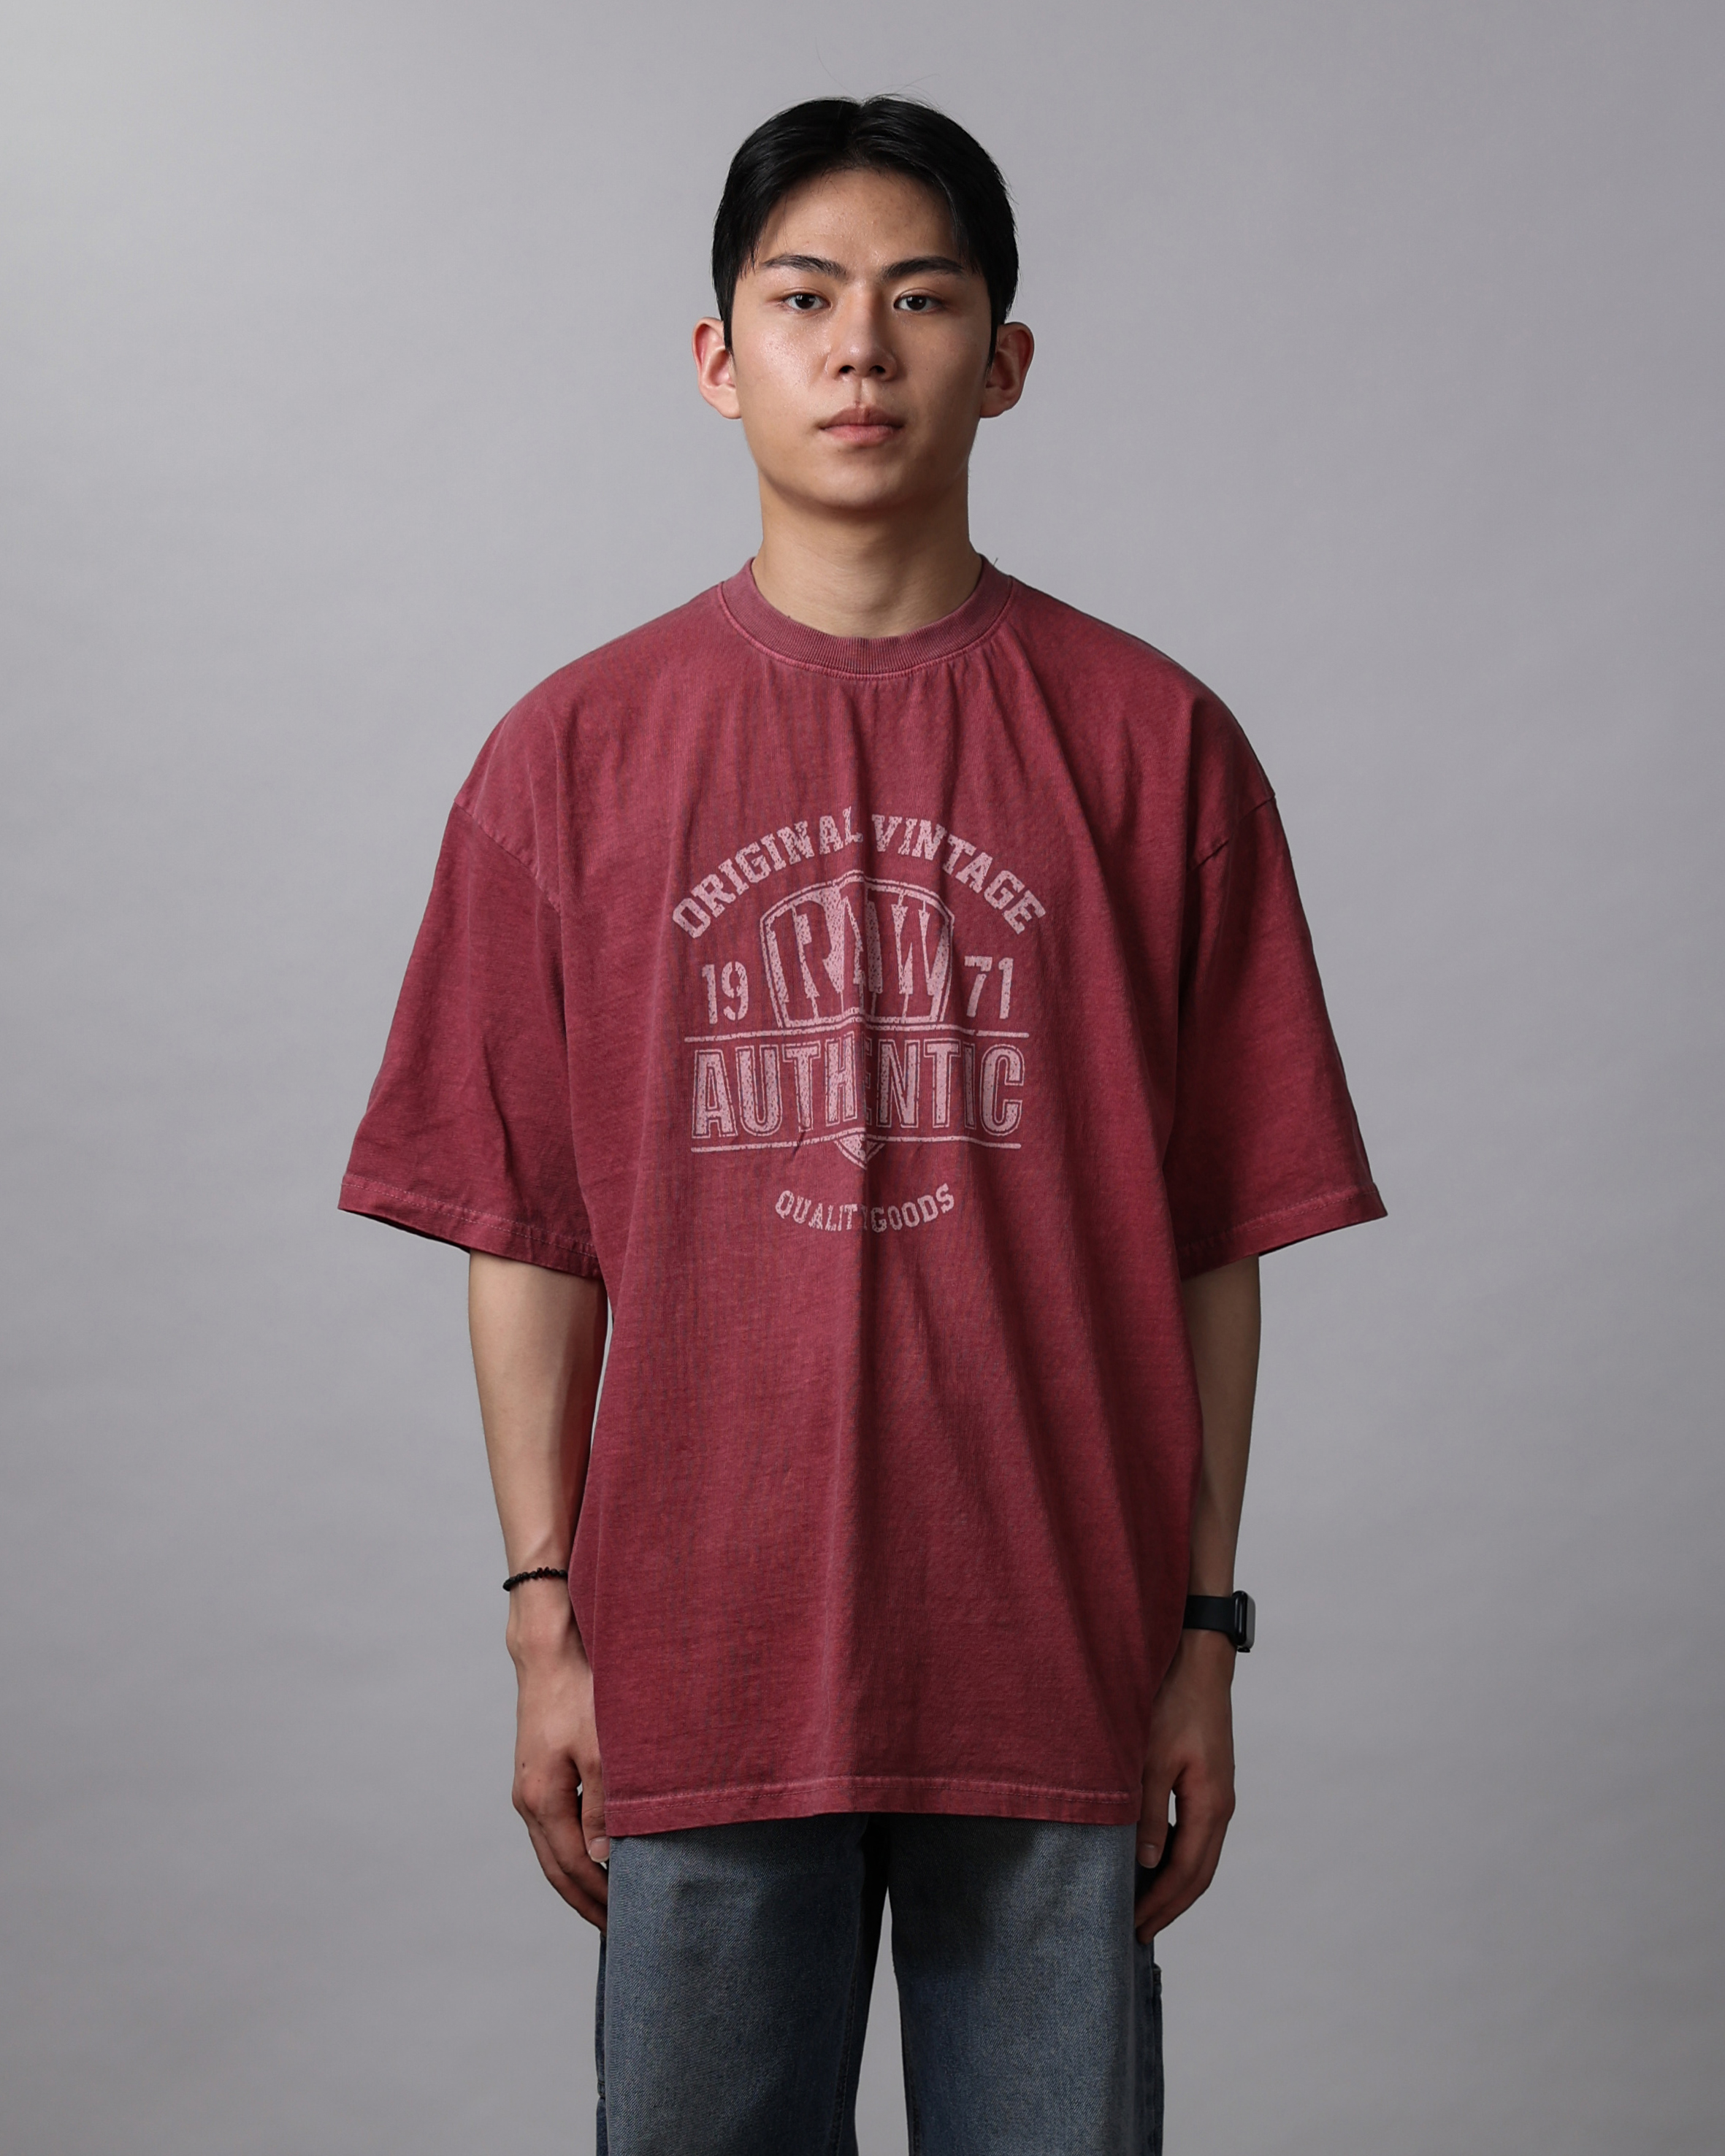 PPSOL RAW AUTHENTIC Pigment T Shirts (Charcoal/Navy/Burgundy)